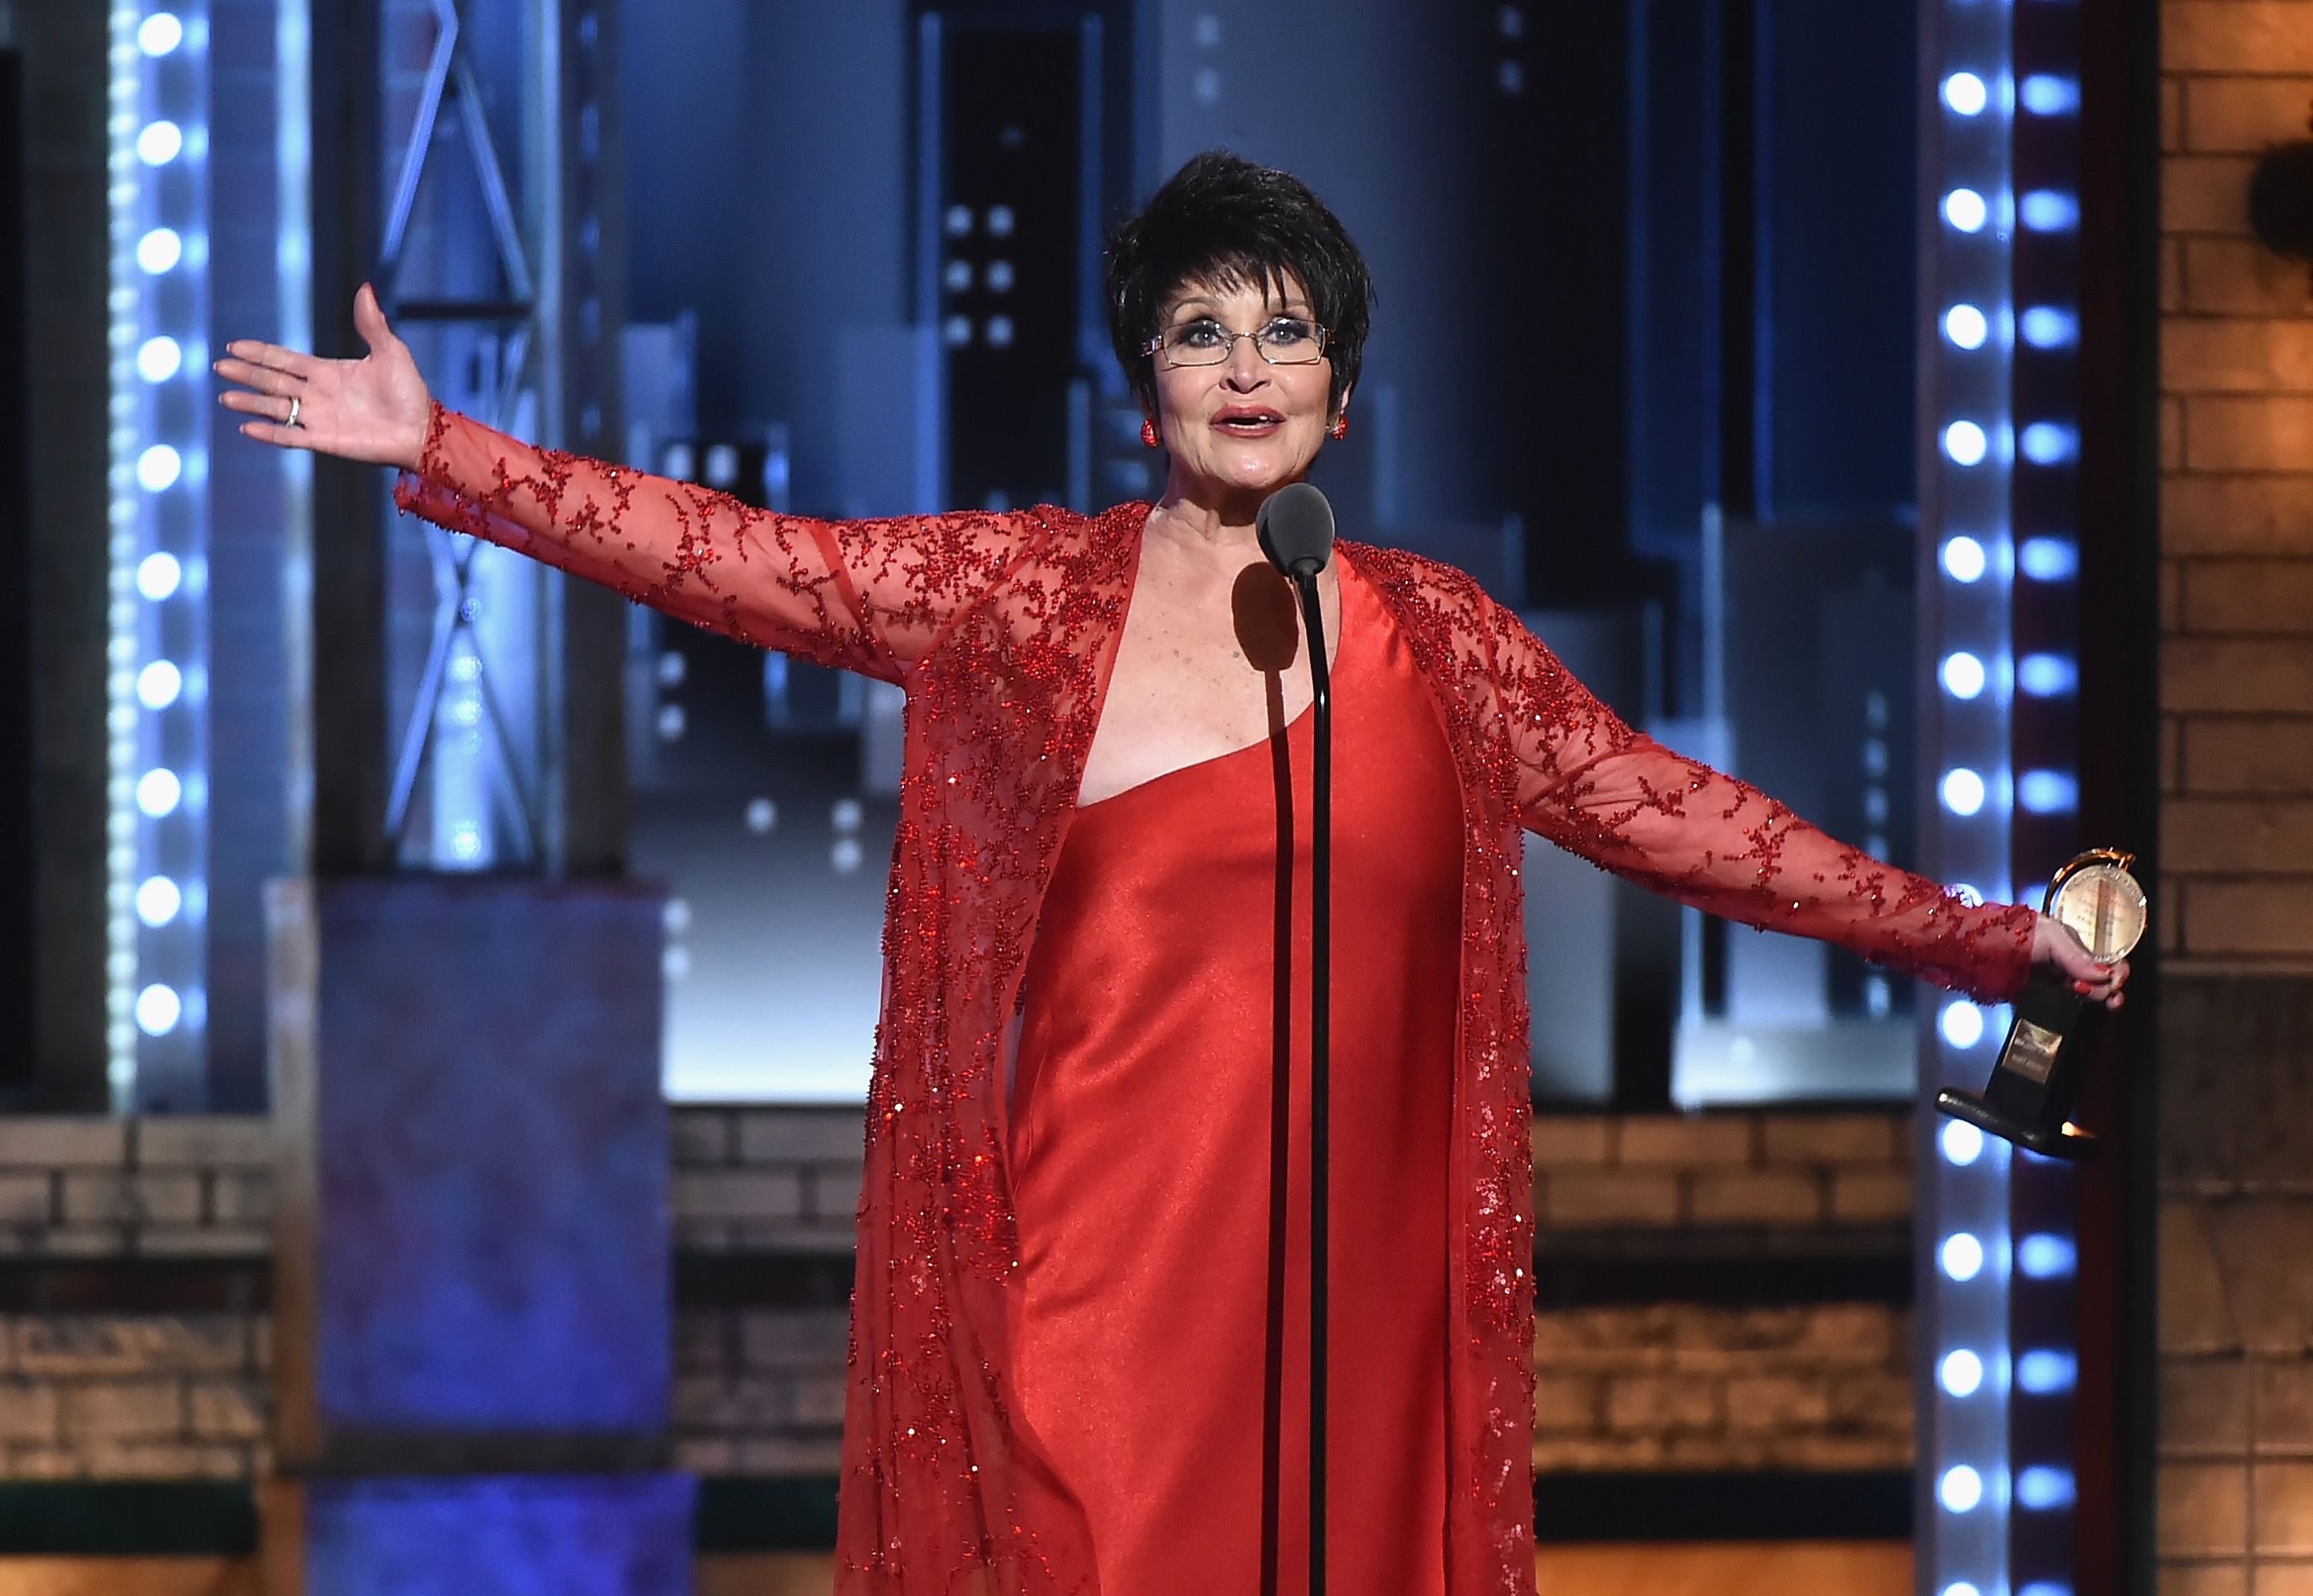 Chita Rivera wearing all red stands with her arms out in front of a microphone with a stand at the Tony awards